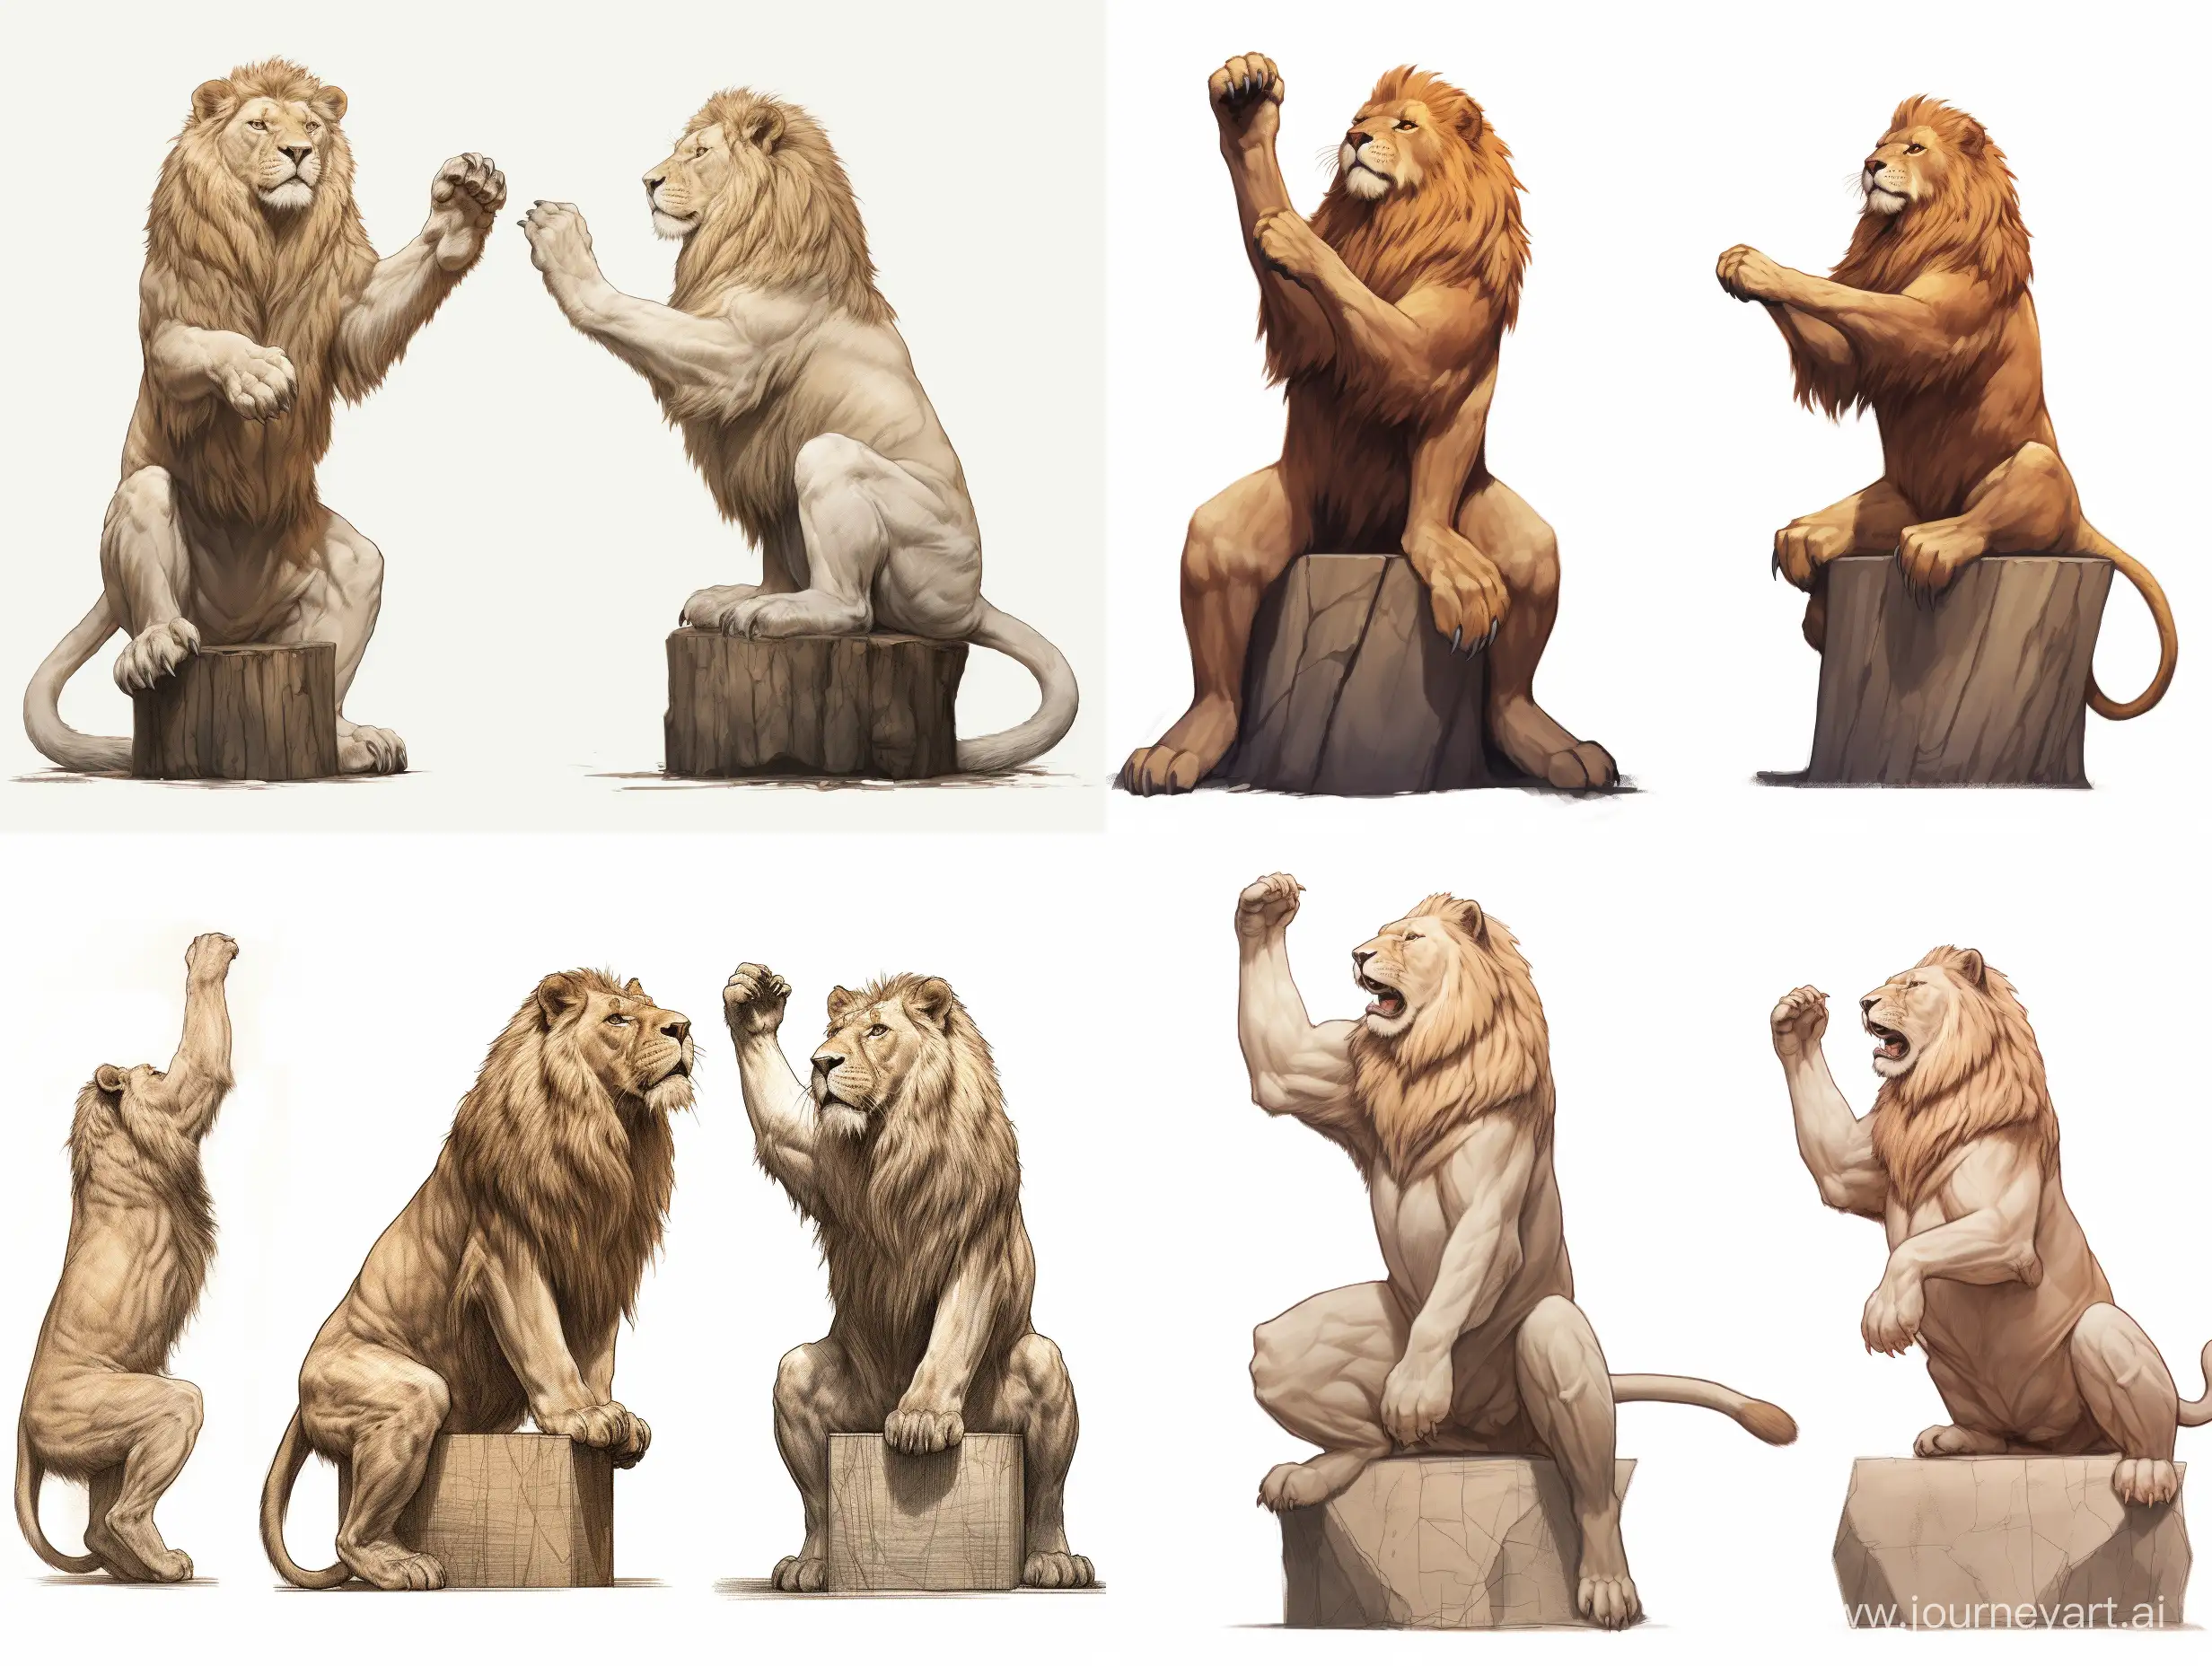 Majestic-Lion-Wood-Carving-Sculpture-Dynamic-3D-Art-with-Raised-Paws